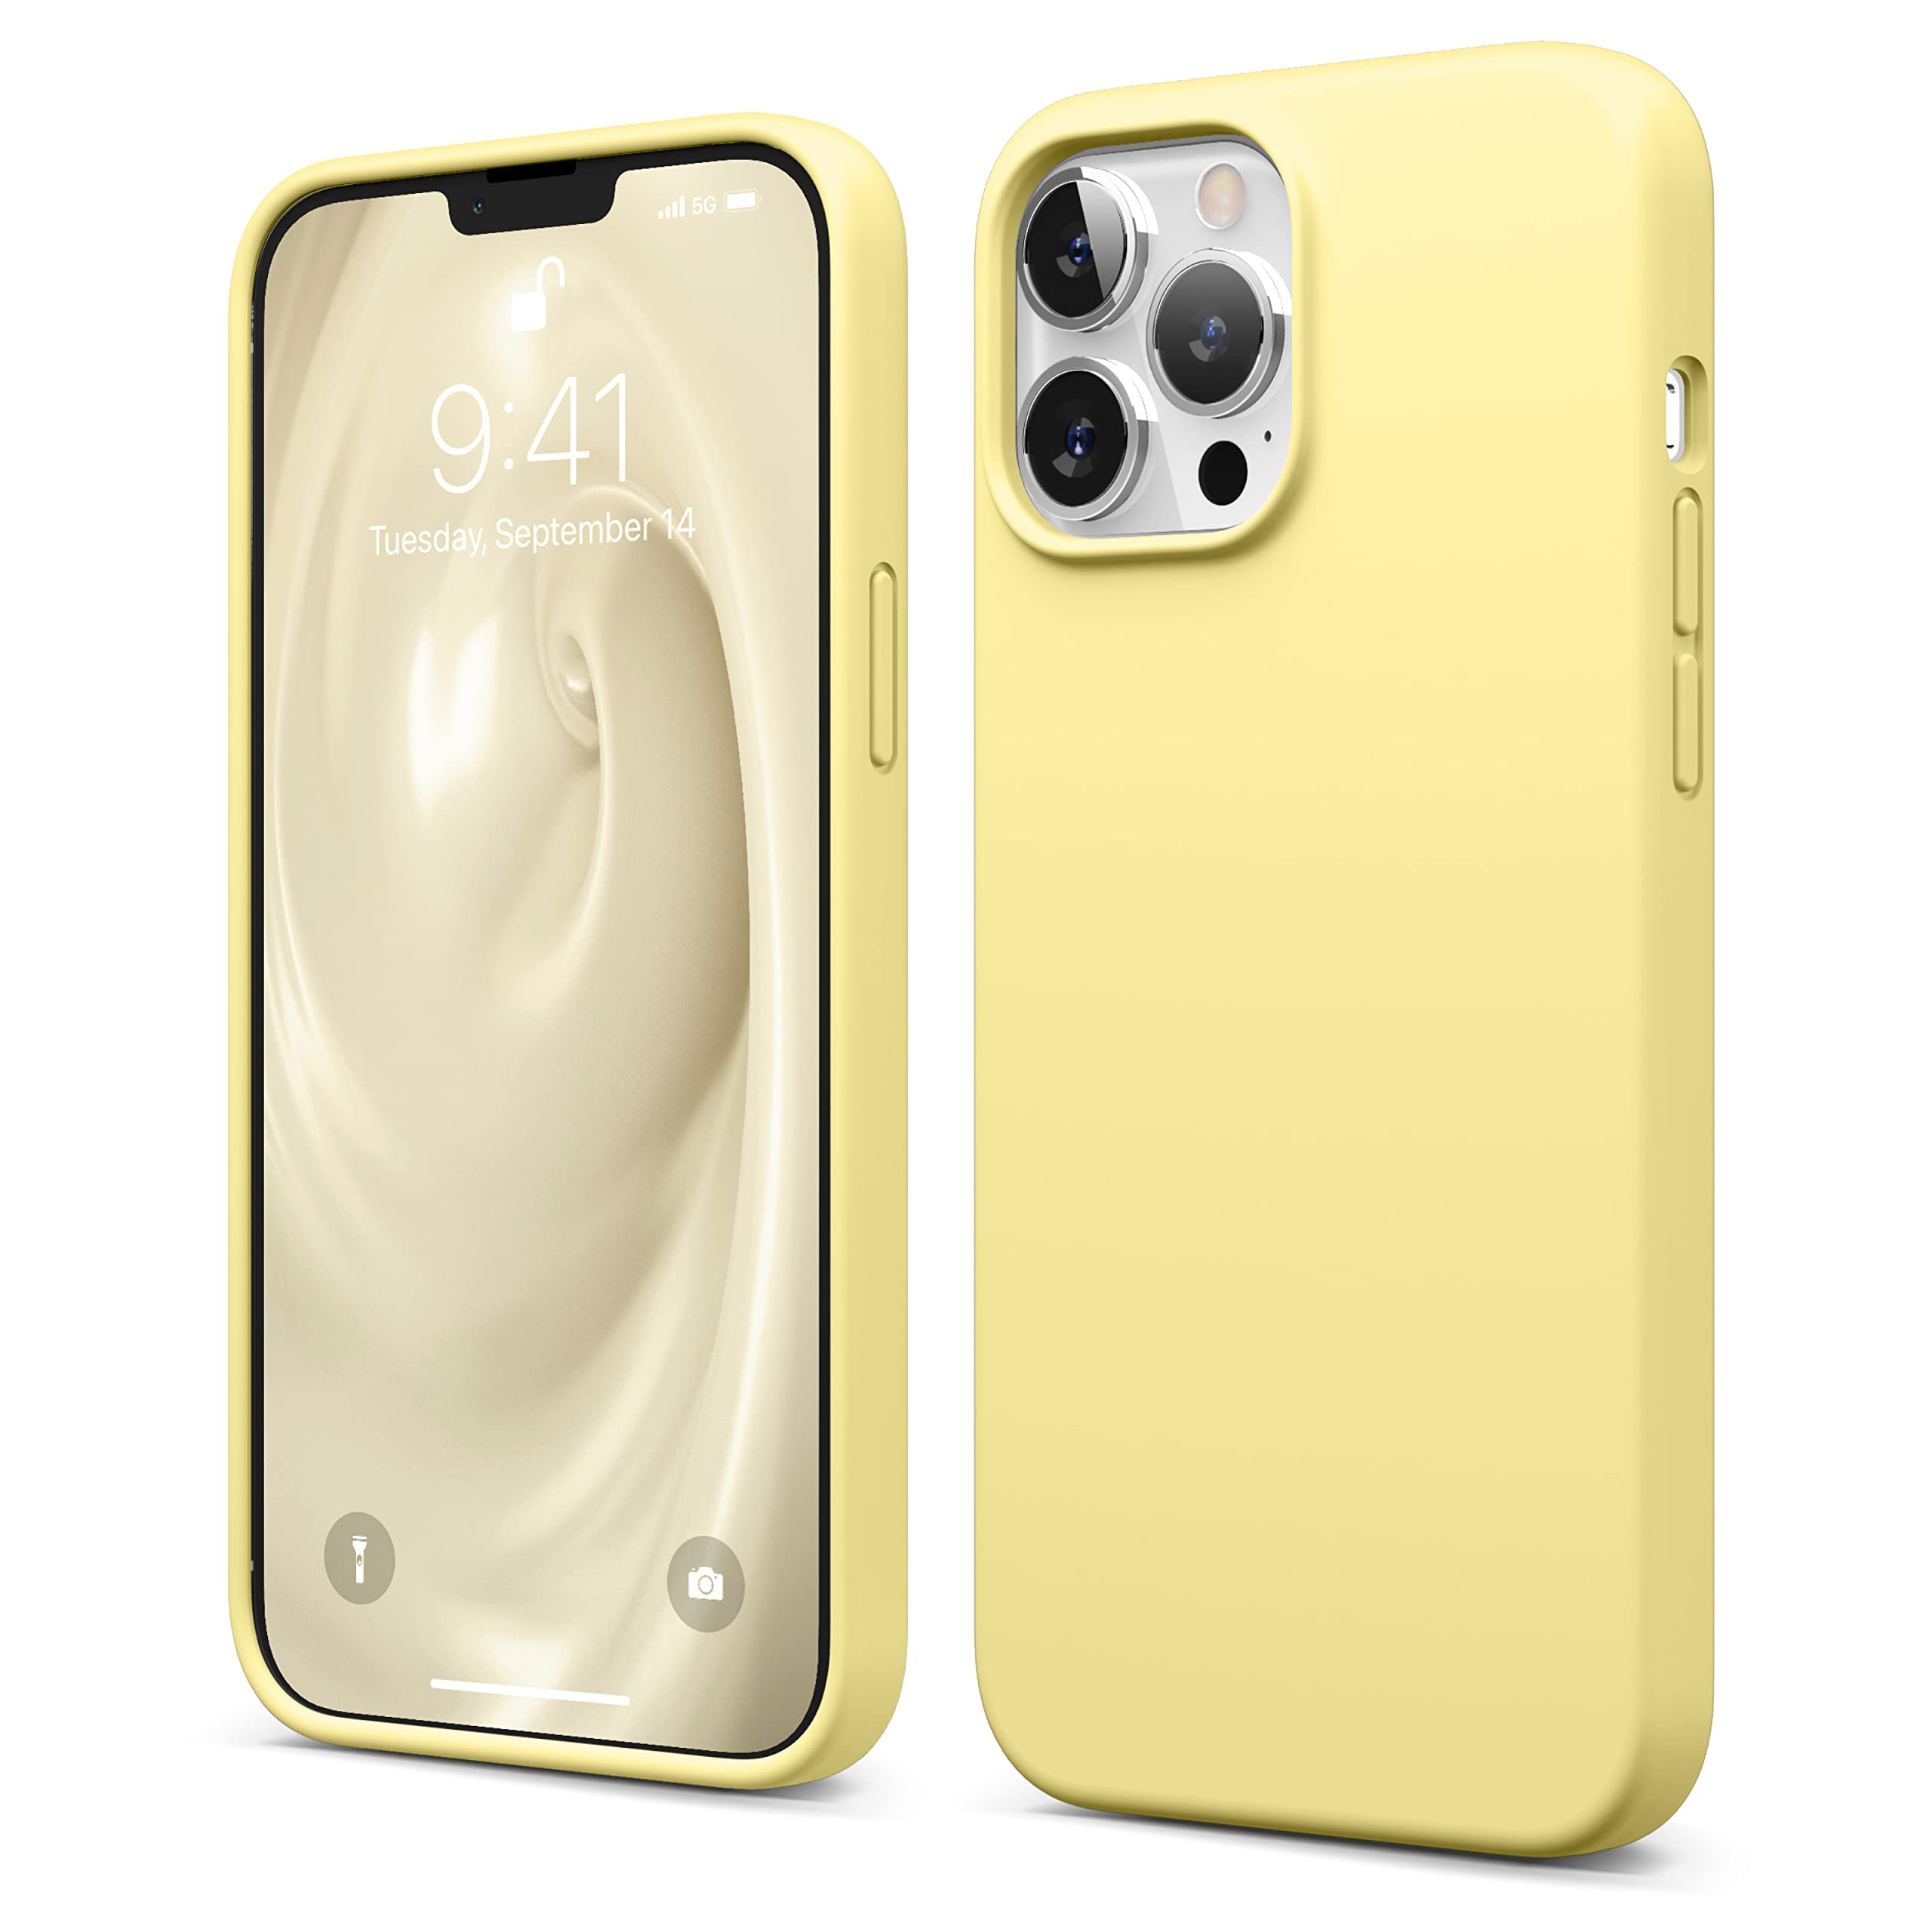 elago Compatible with iPhone 13 Pro Max Case, Liquid Silicone Case, Full Body Screen Camera Protective Cover, Shockproof, Slim Phone Case, Anti-Scratch Soft Microfiber Lining, 6.7 inch (Yellow)